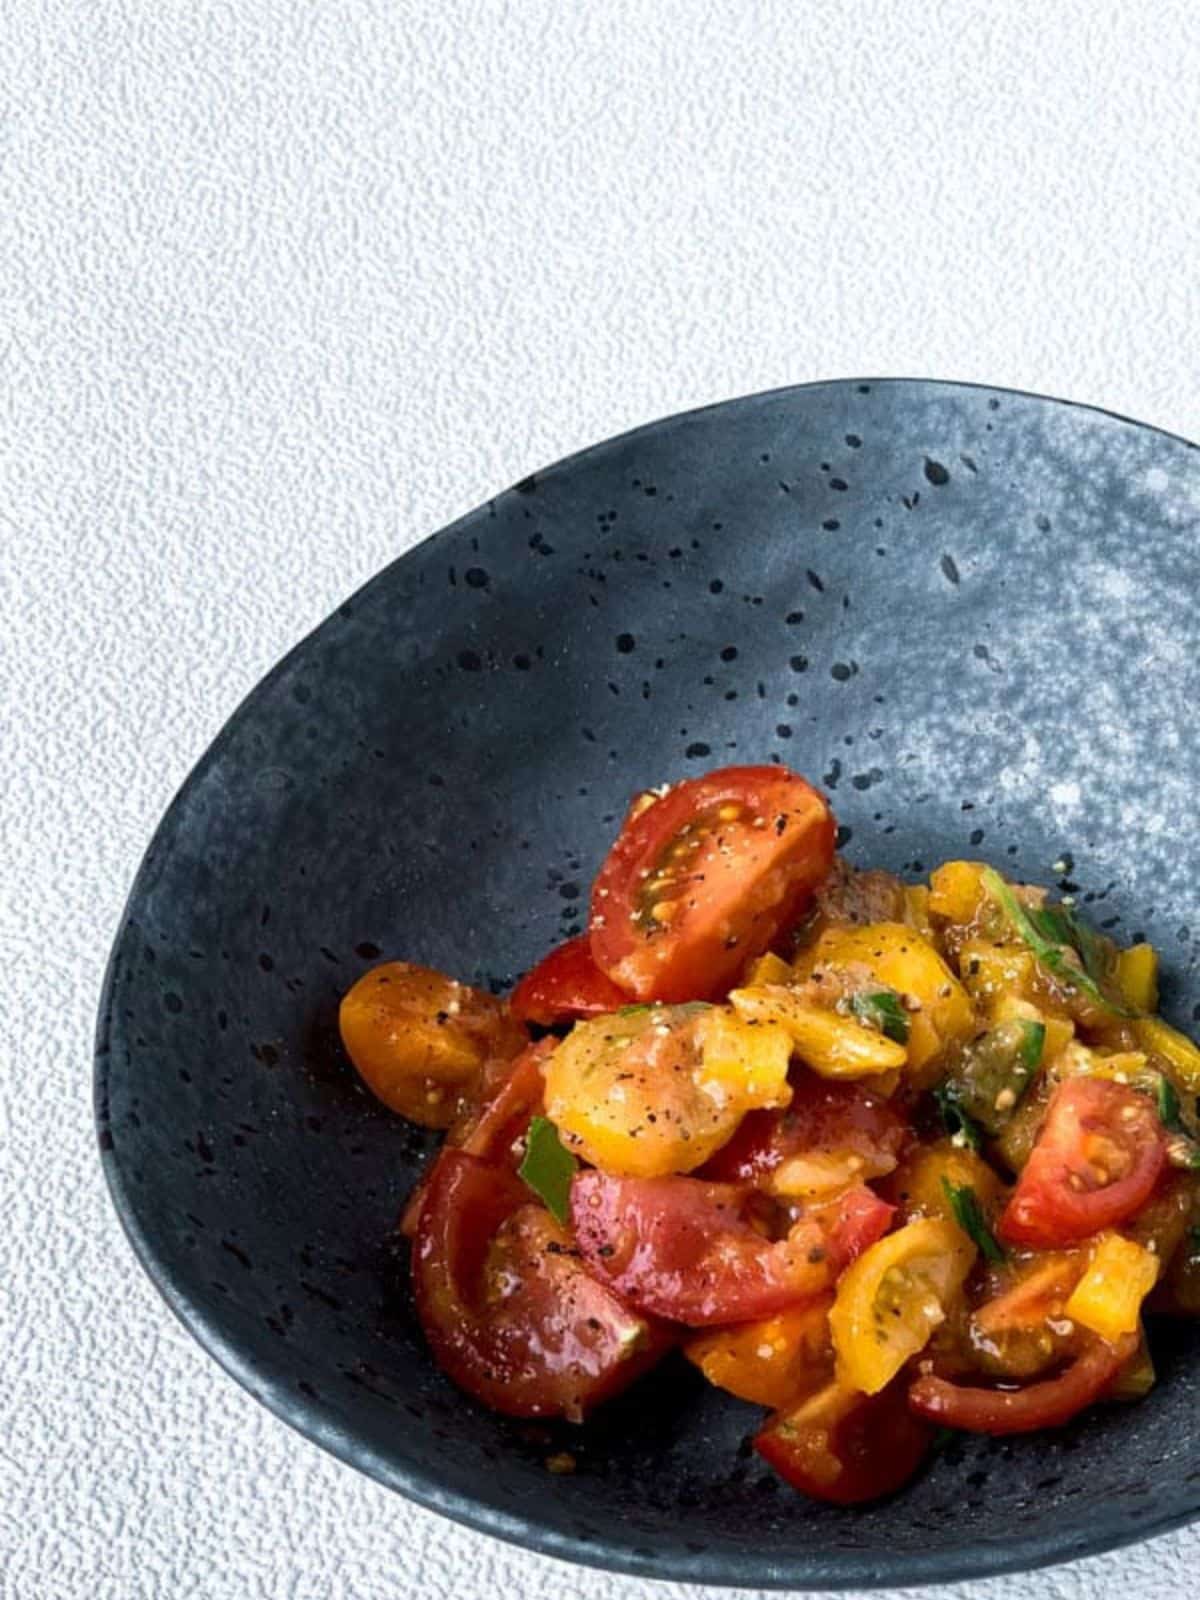 Cherry tomato salad in a grey plate